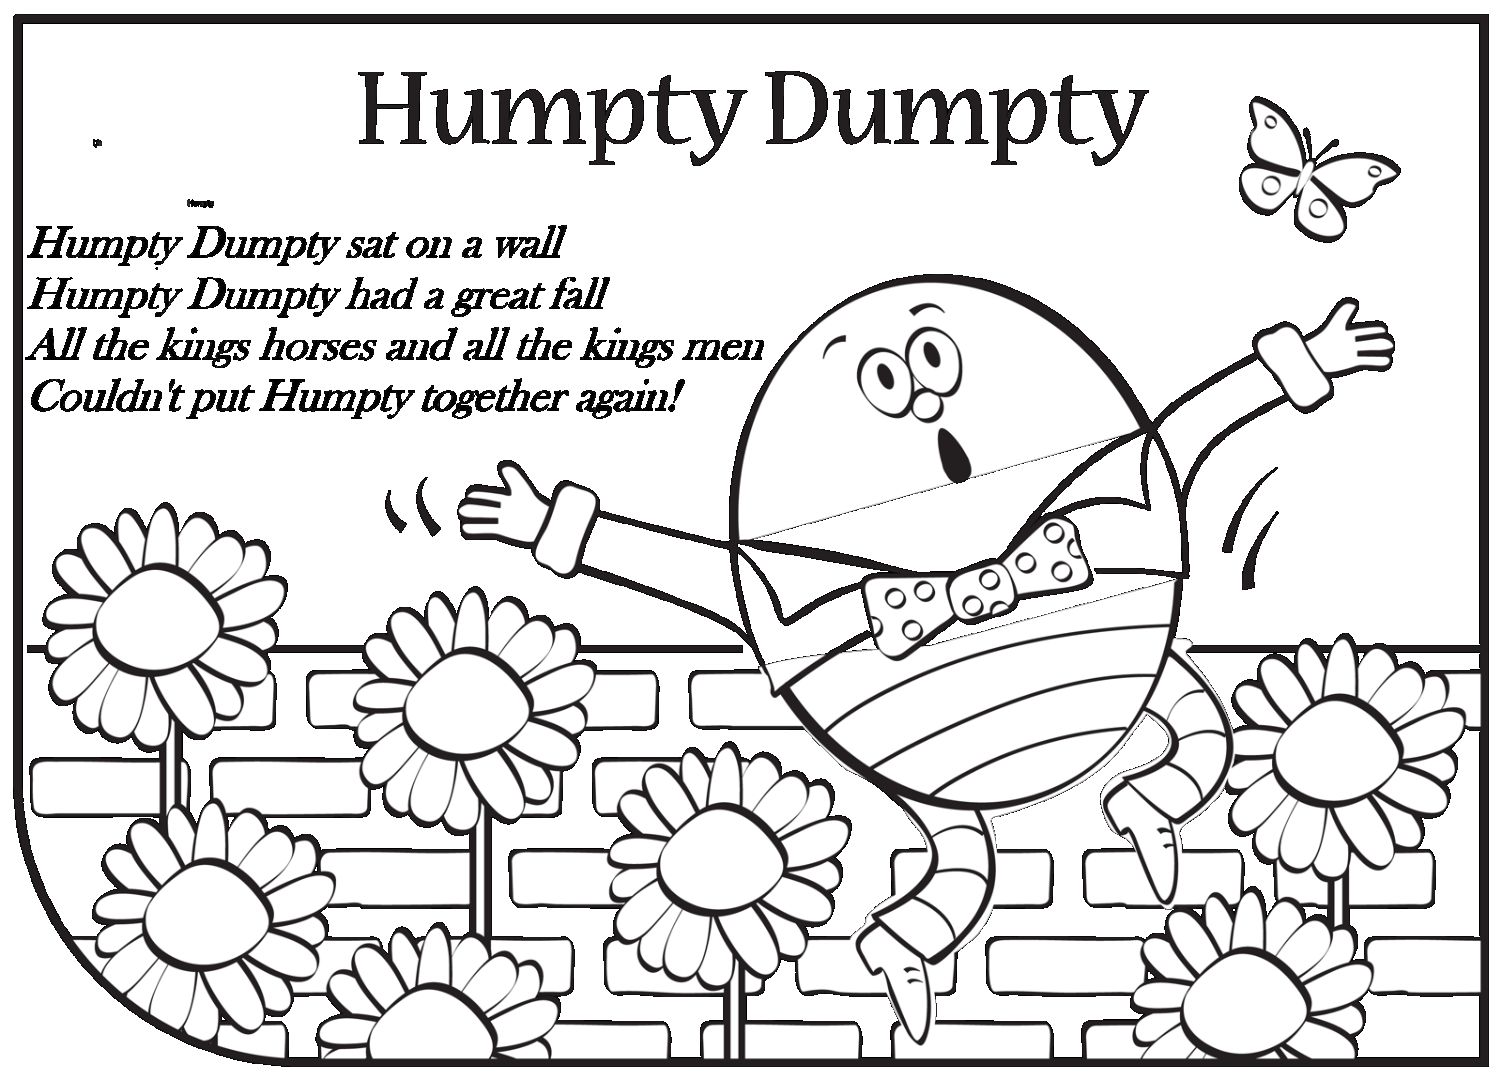 Humpty Dumpty Coloring Page At GetDrawings Free Download